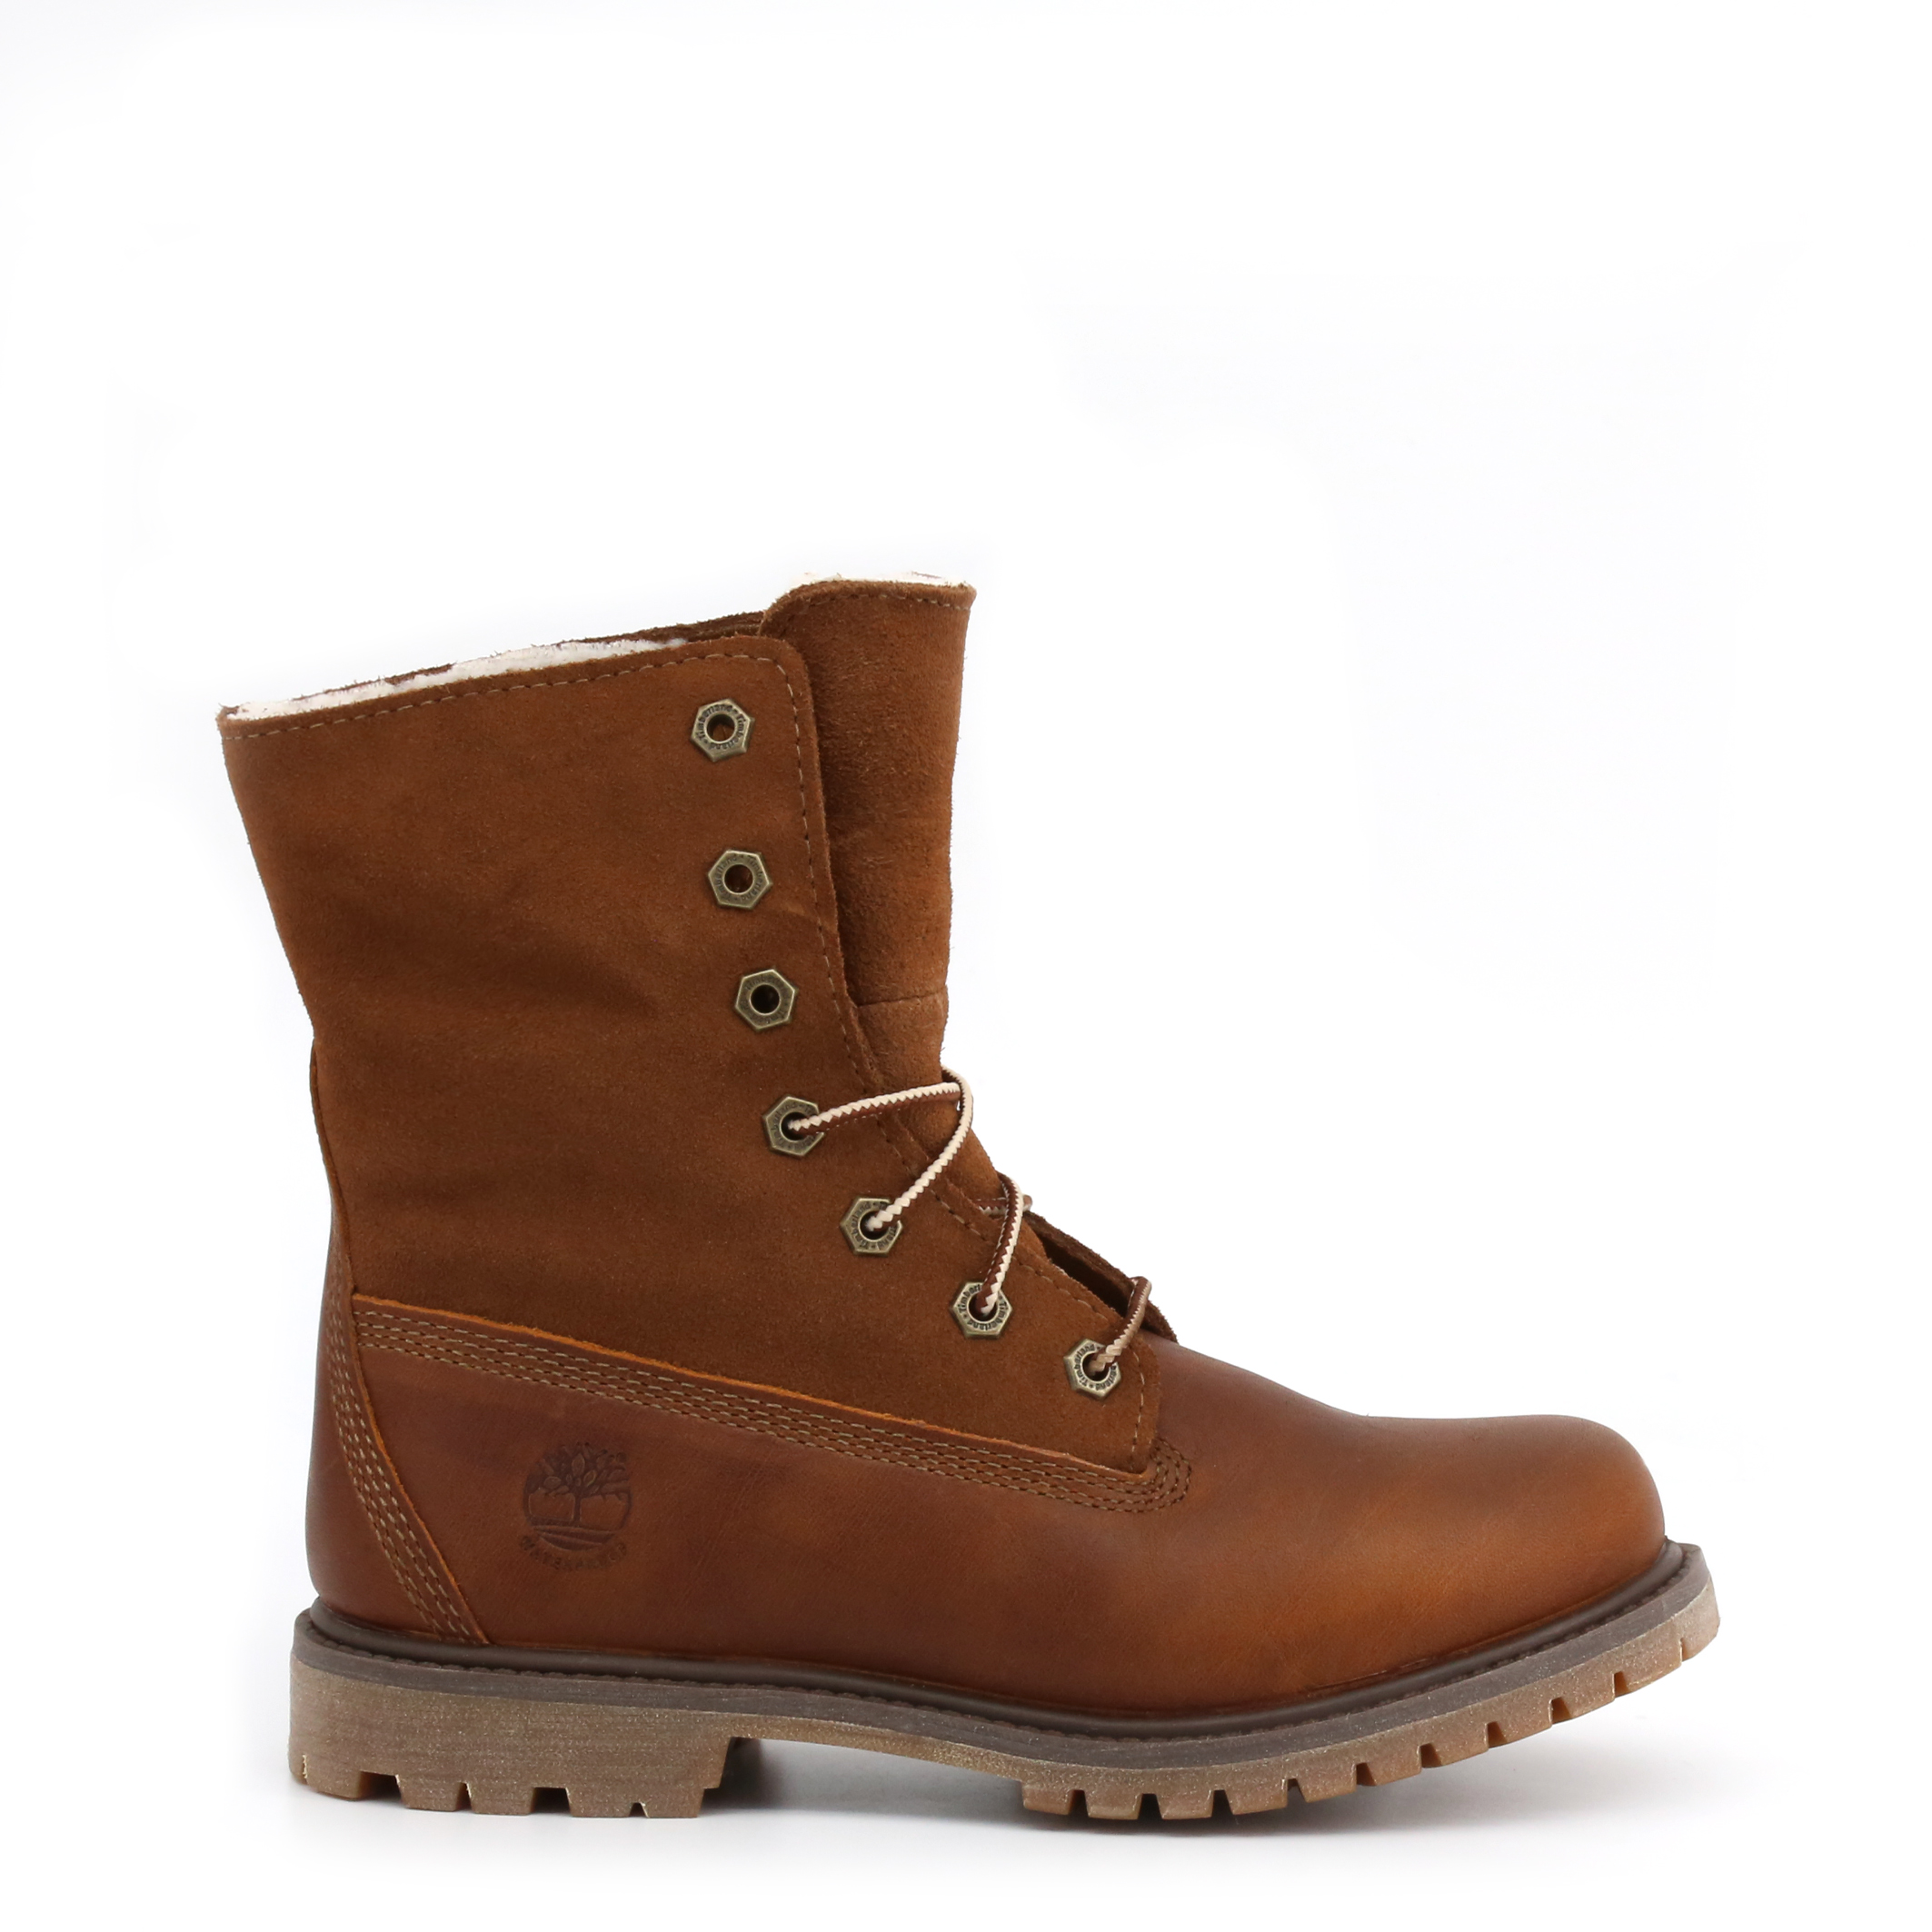 timberland women's shoes sale